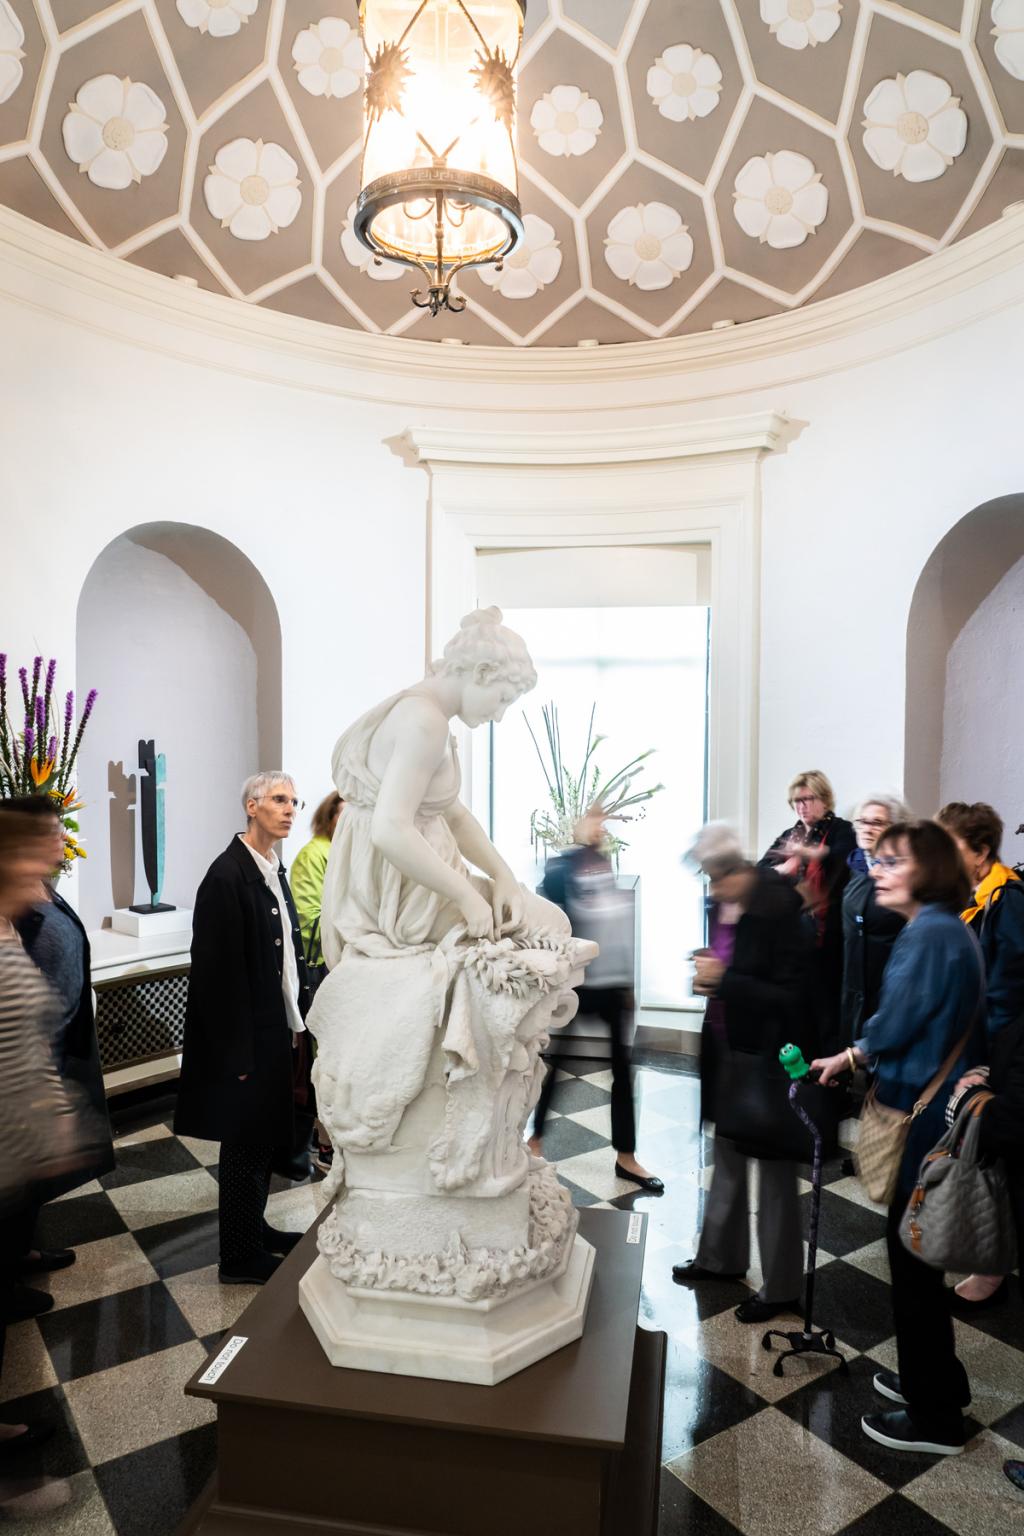 A tour group in the Rotunda gallery looking at the Crown for the Victor sculpture with a floral arrangement behind it.